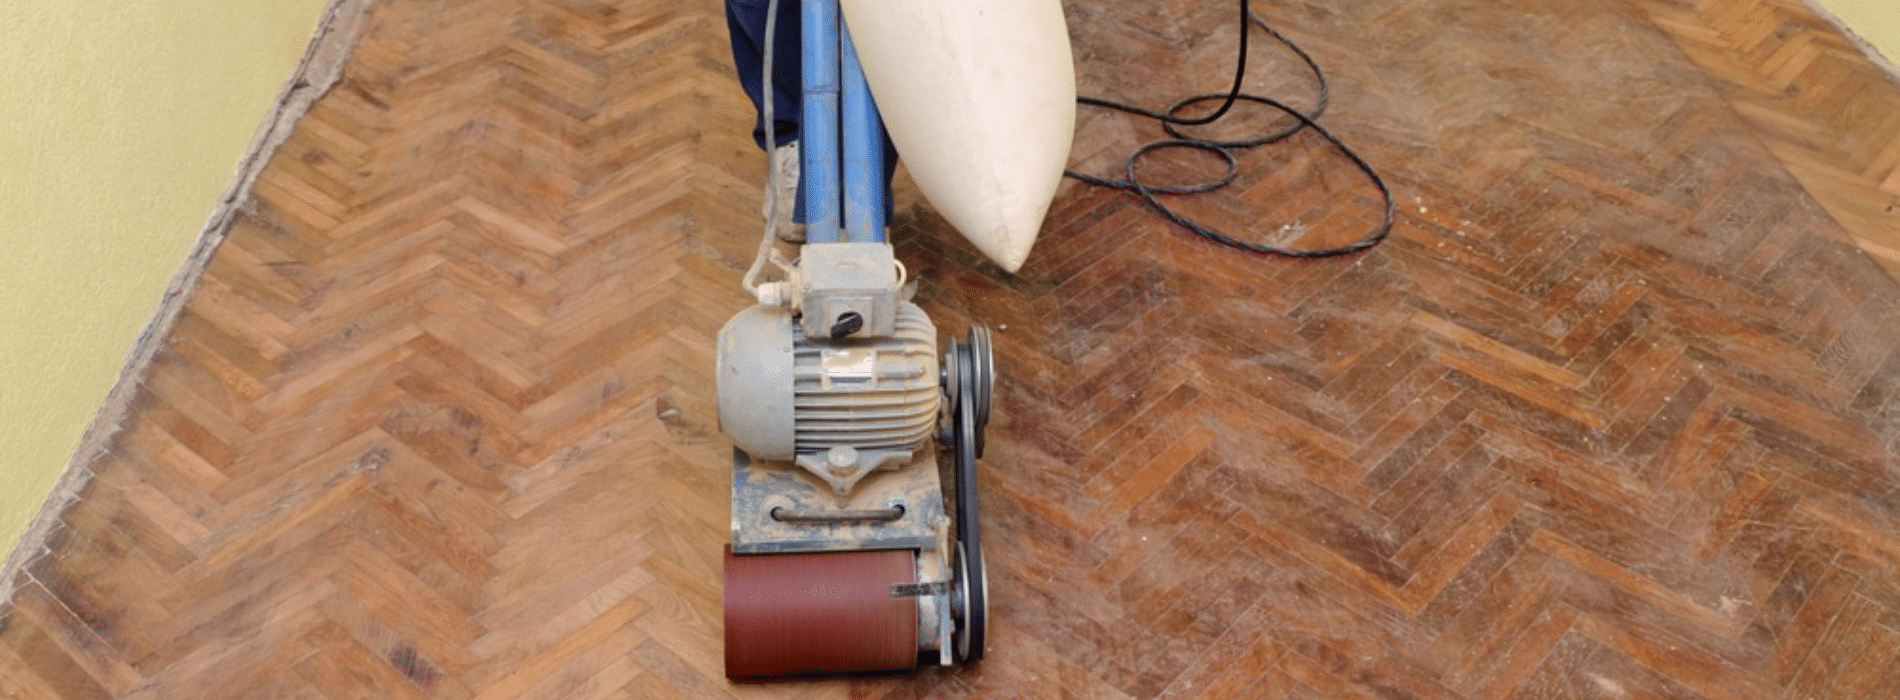 Mr Sander® in Seven Sisters, N15, employ the powerful Bona Belt Effect sander (2.2 kW) to sand herringbone floors. Operating at 230V and 50Hz/60Hz, this 250x750 mm sander is connected to a dust extraction system featuring a HEPA filter, guaranteeing a thorough and efficient result.